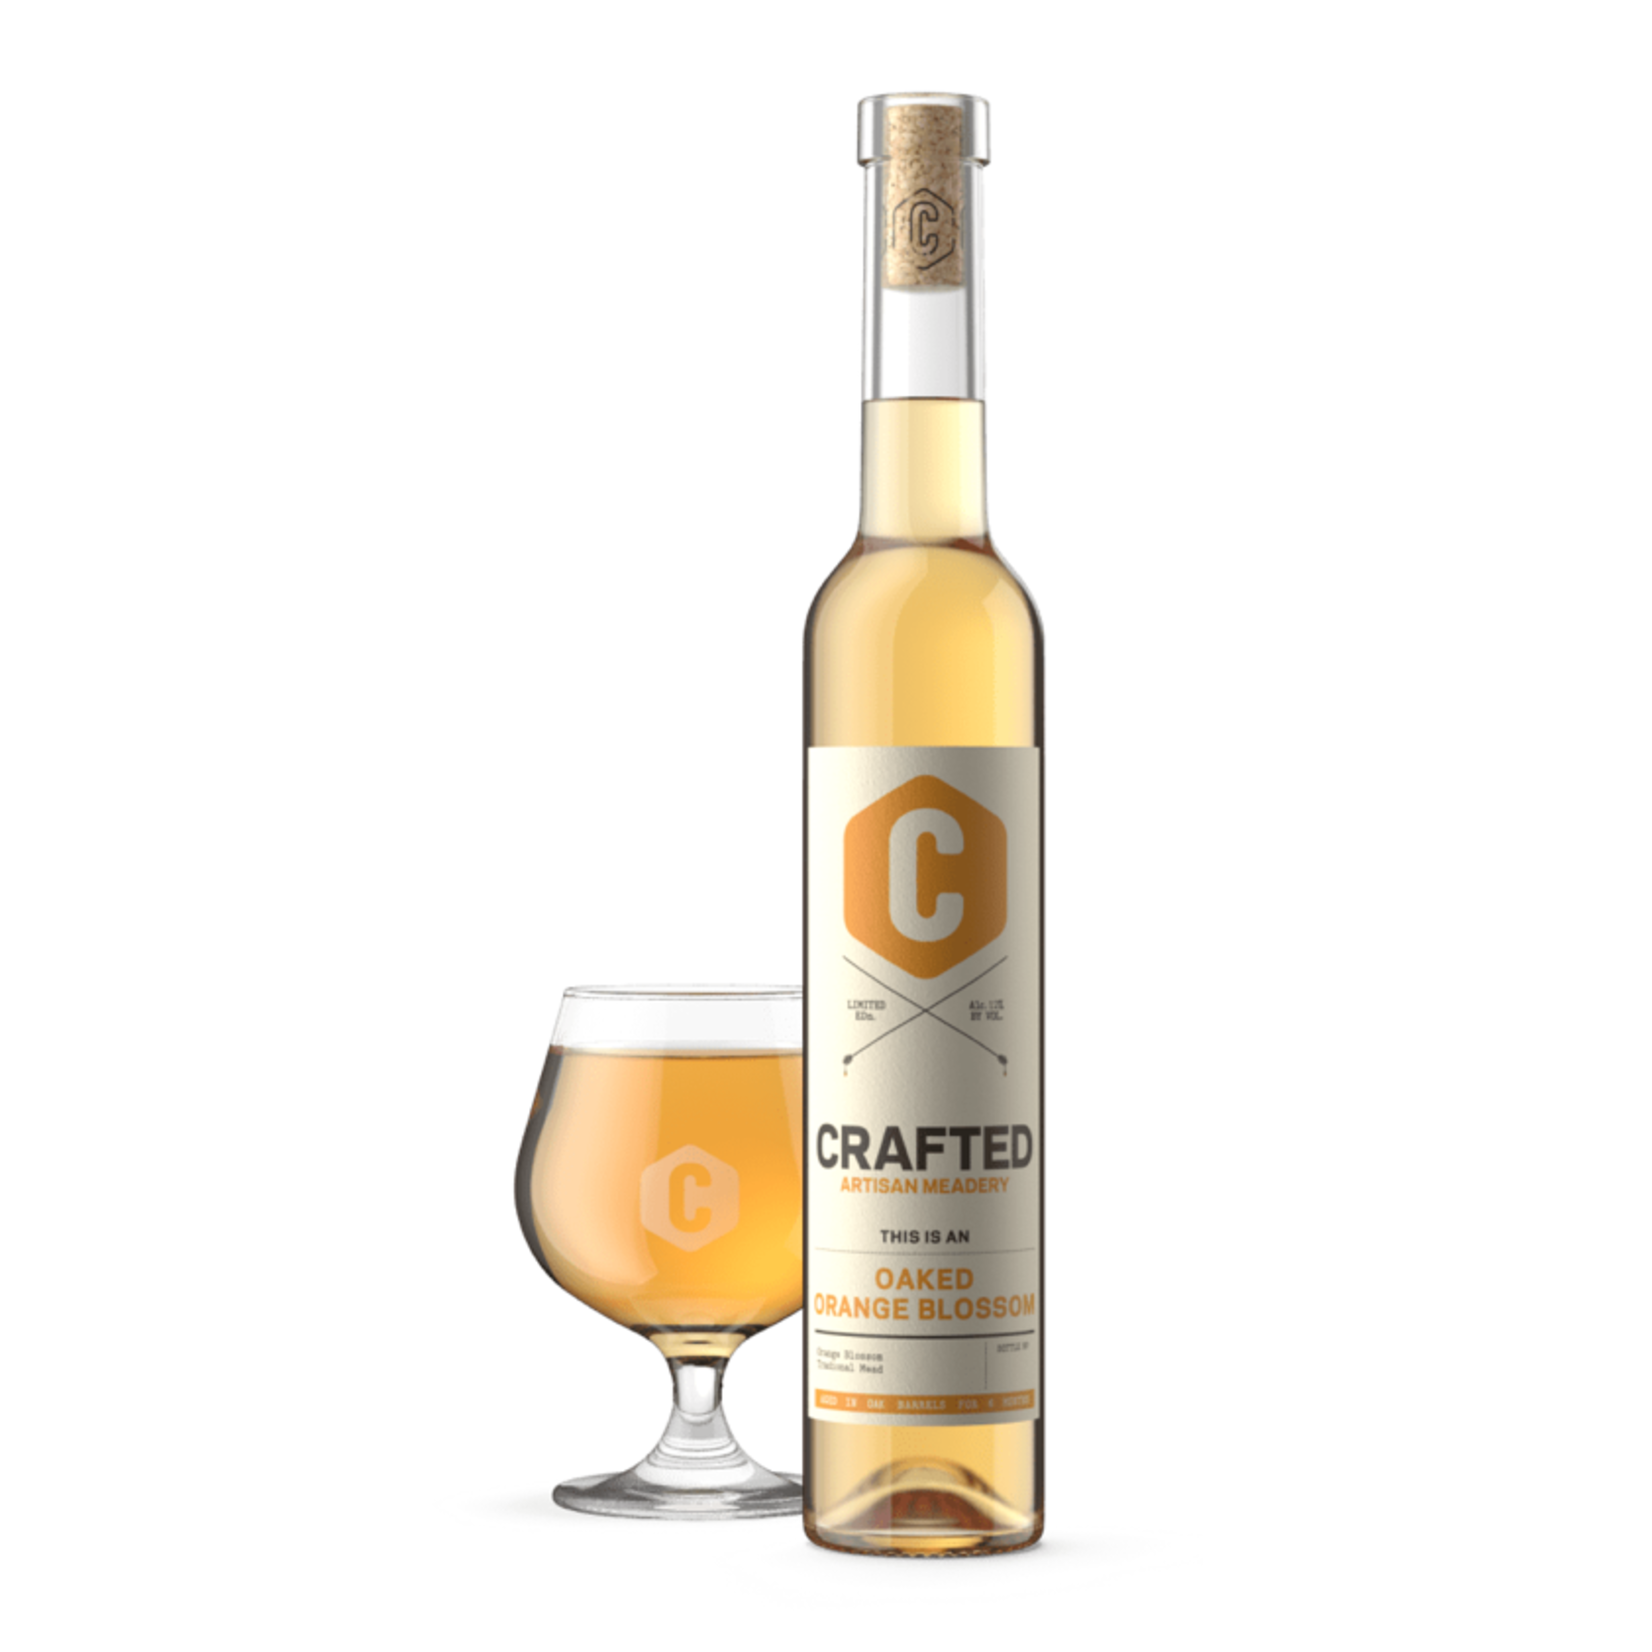 Crafted Artisan Meadery Oaked Orange Blossom Mead